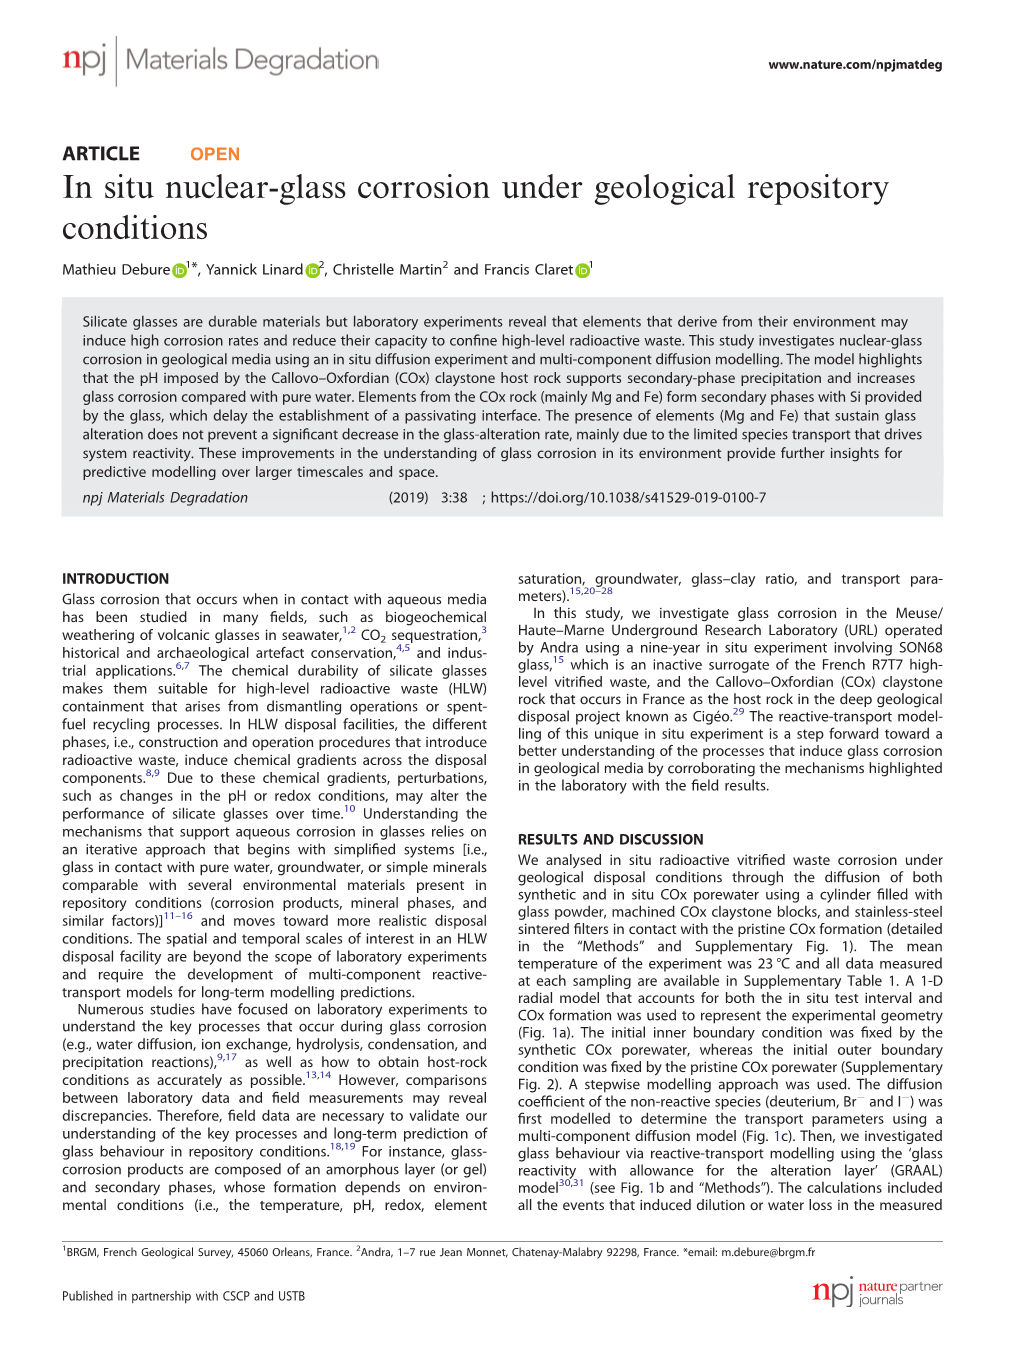 In Situ Nuclear-Glass Corrosion Under Geological Repository Conditions